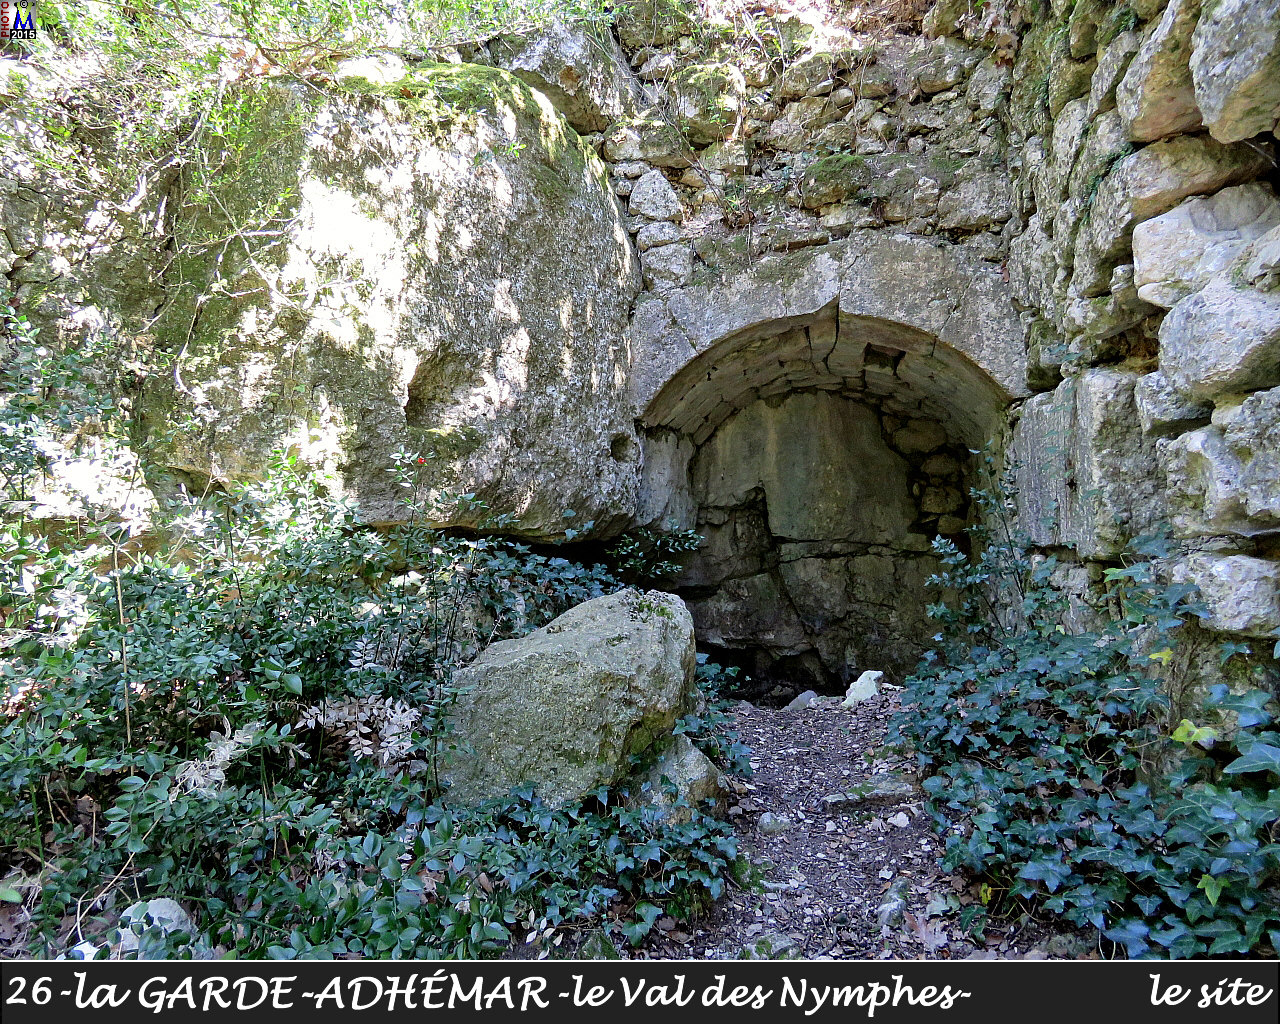 26GARDE-ADHEMARzVAL-NYMPHES_site_104.jpg